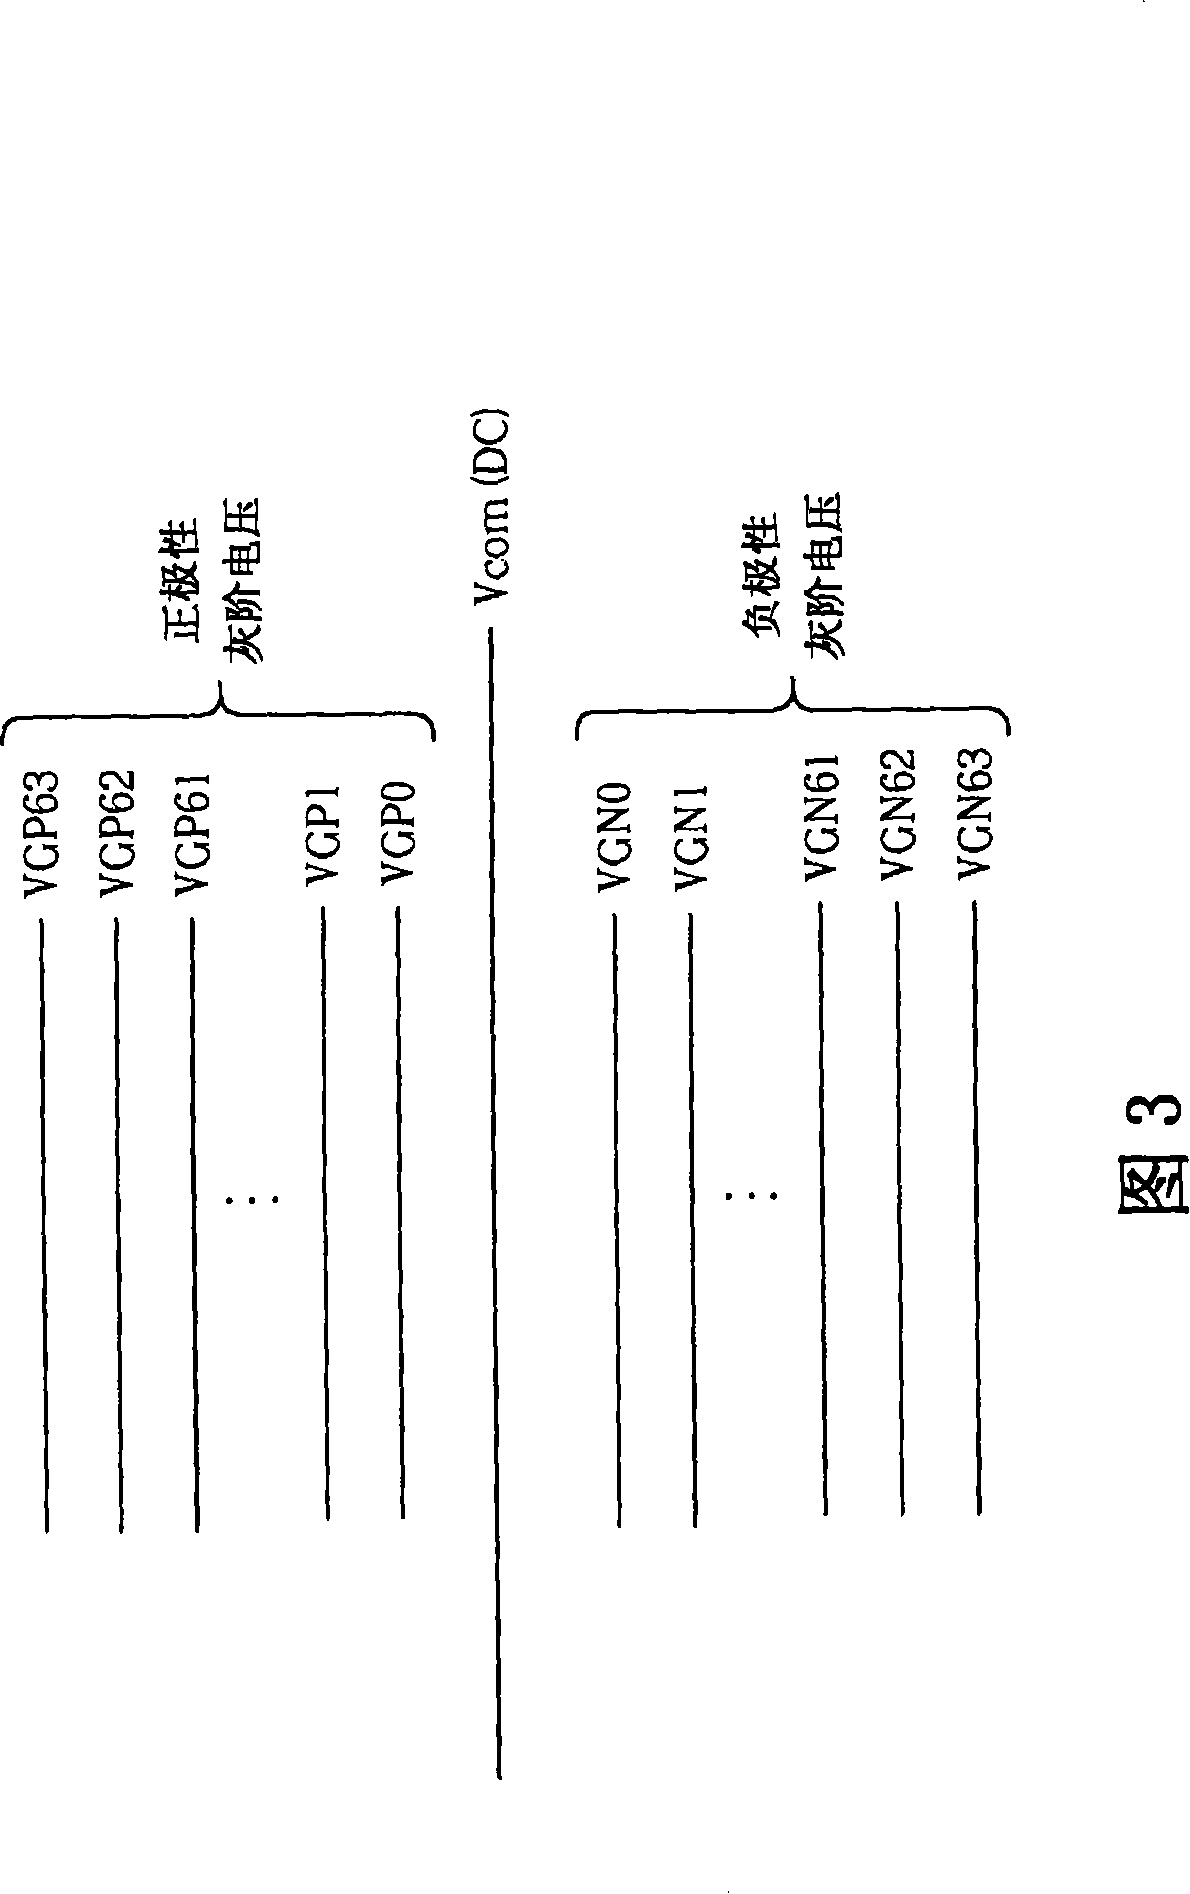 LCD device based on point reverse turn operation